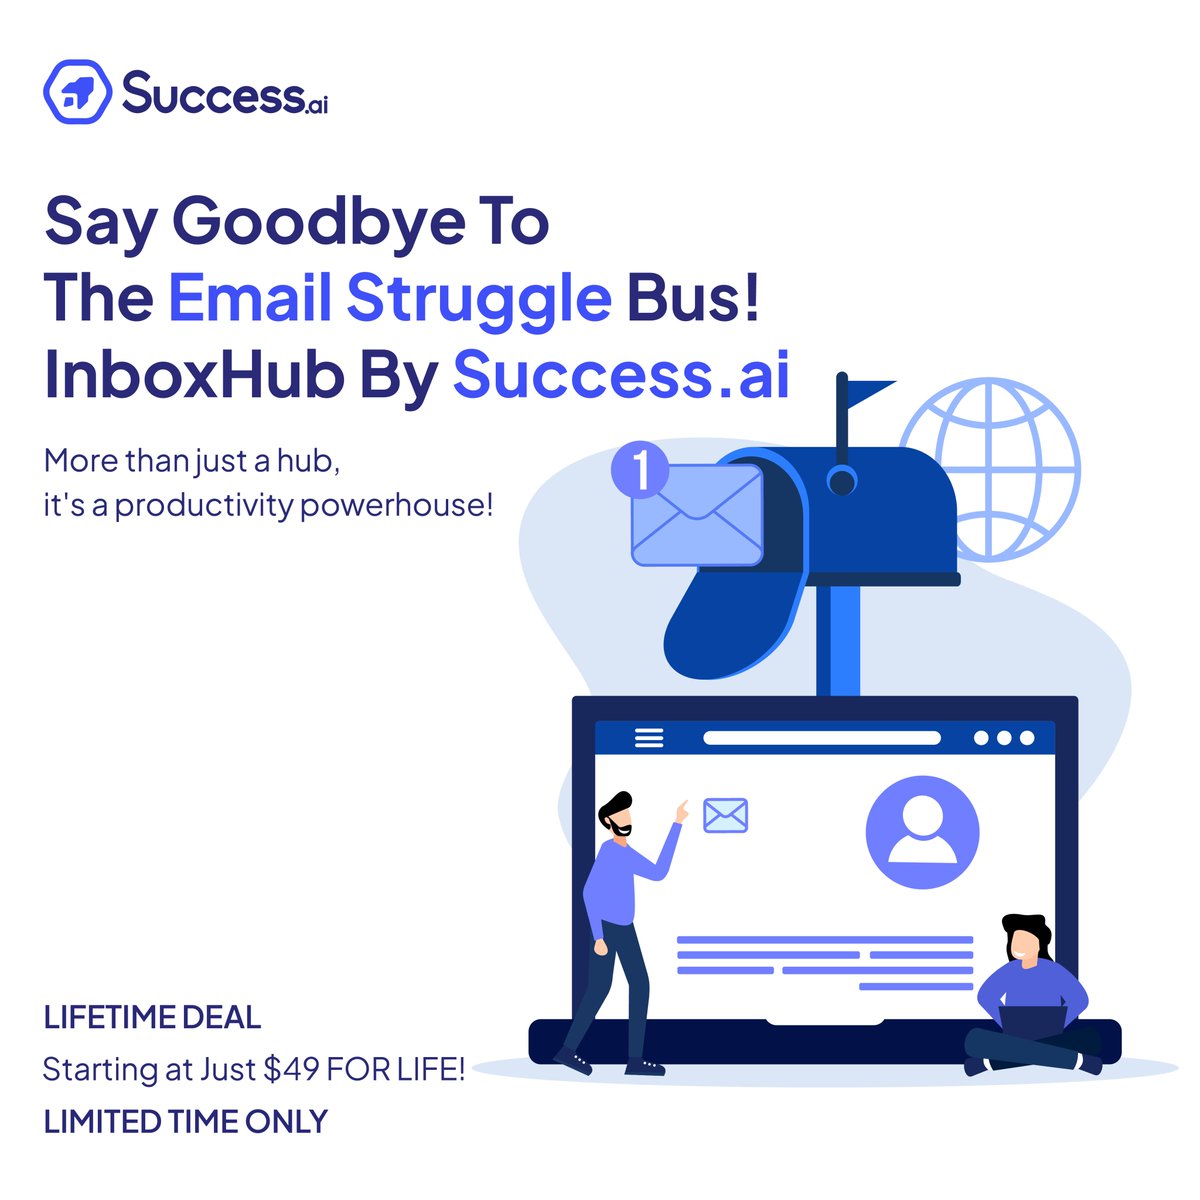 Solve email chaos with InboxHub by Success.ai! Centralize emails, streamline search, and boost productivity. Try it today and unlock your email potential!

Grab our Lifetime Deal: appsumo.com/products/succe…

#SuccessAi #InboxHub #LTD #SuperchargeYourInbox #GoodbyeEmail